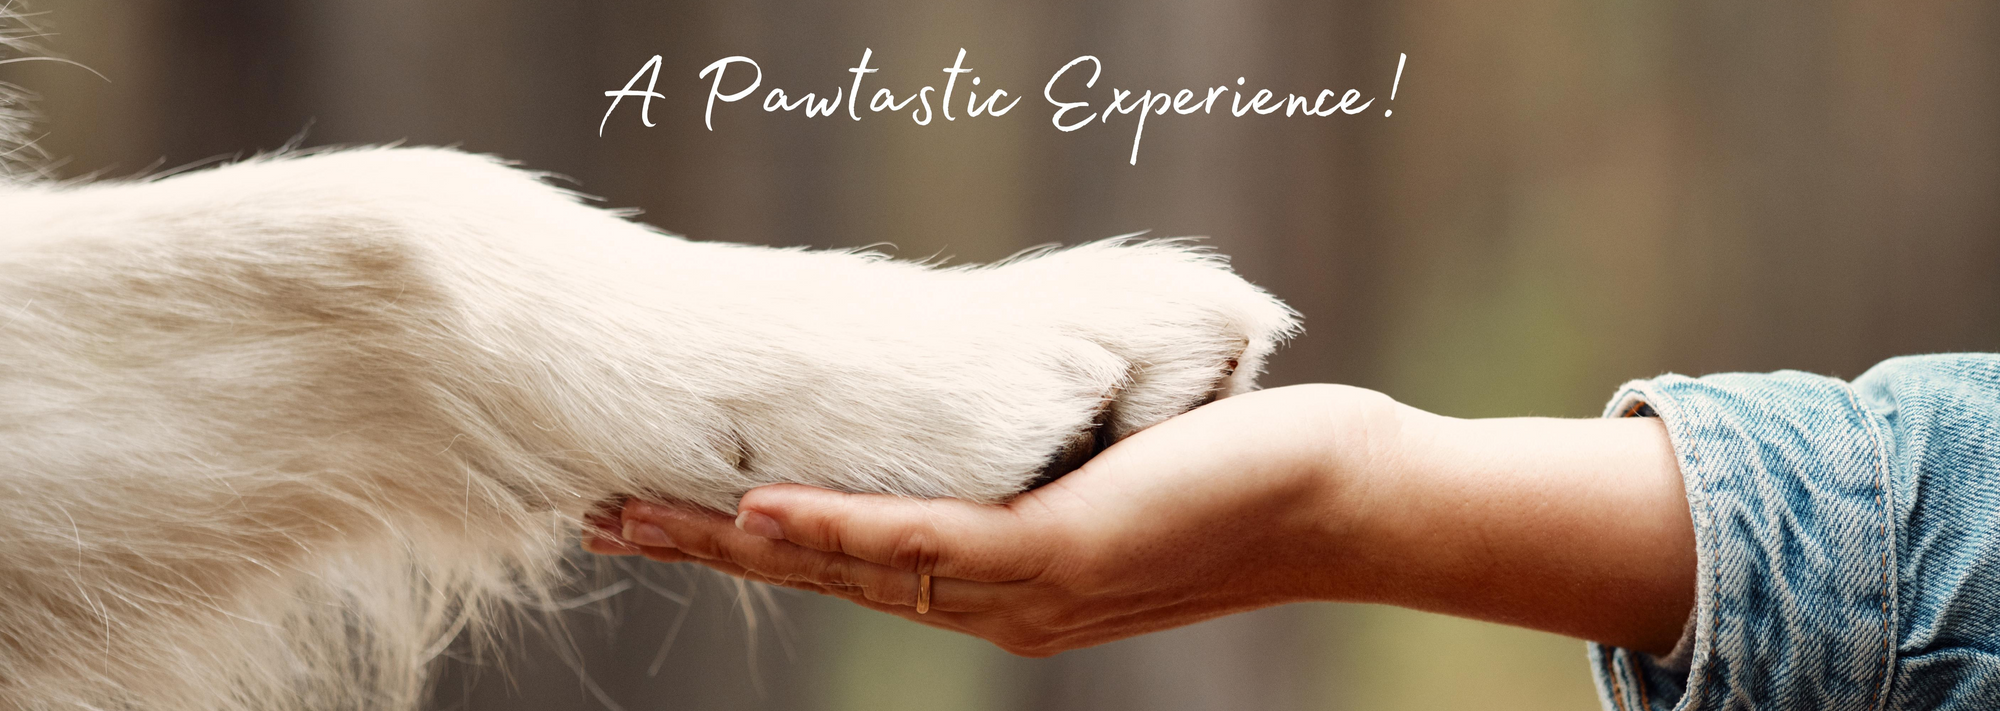 A Pawtastic Experience!